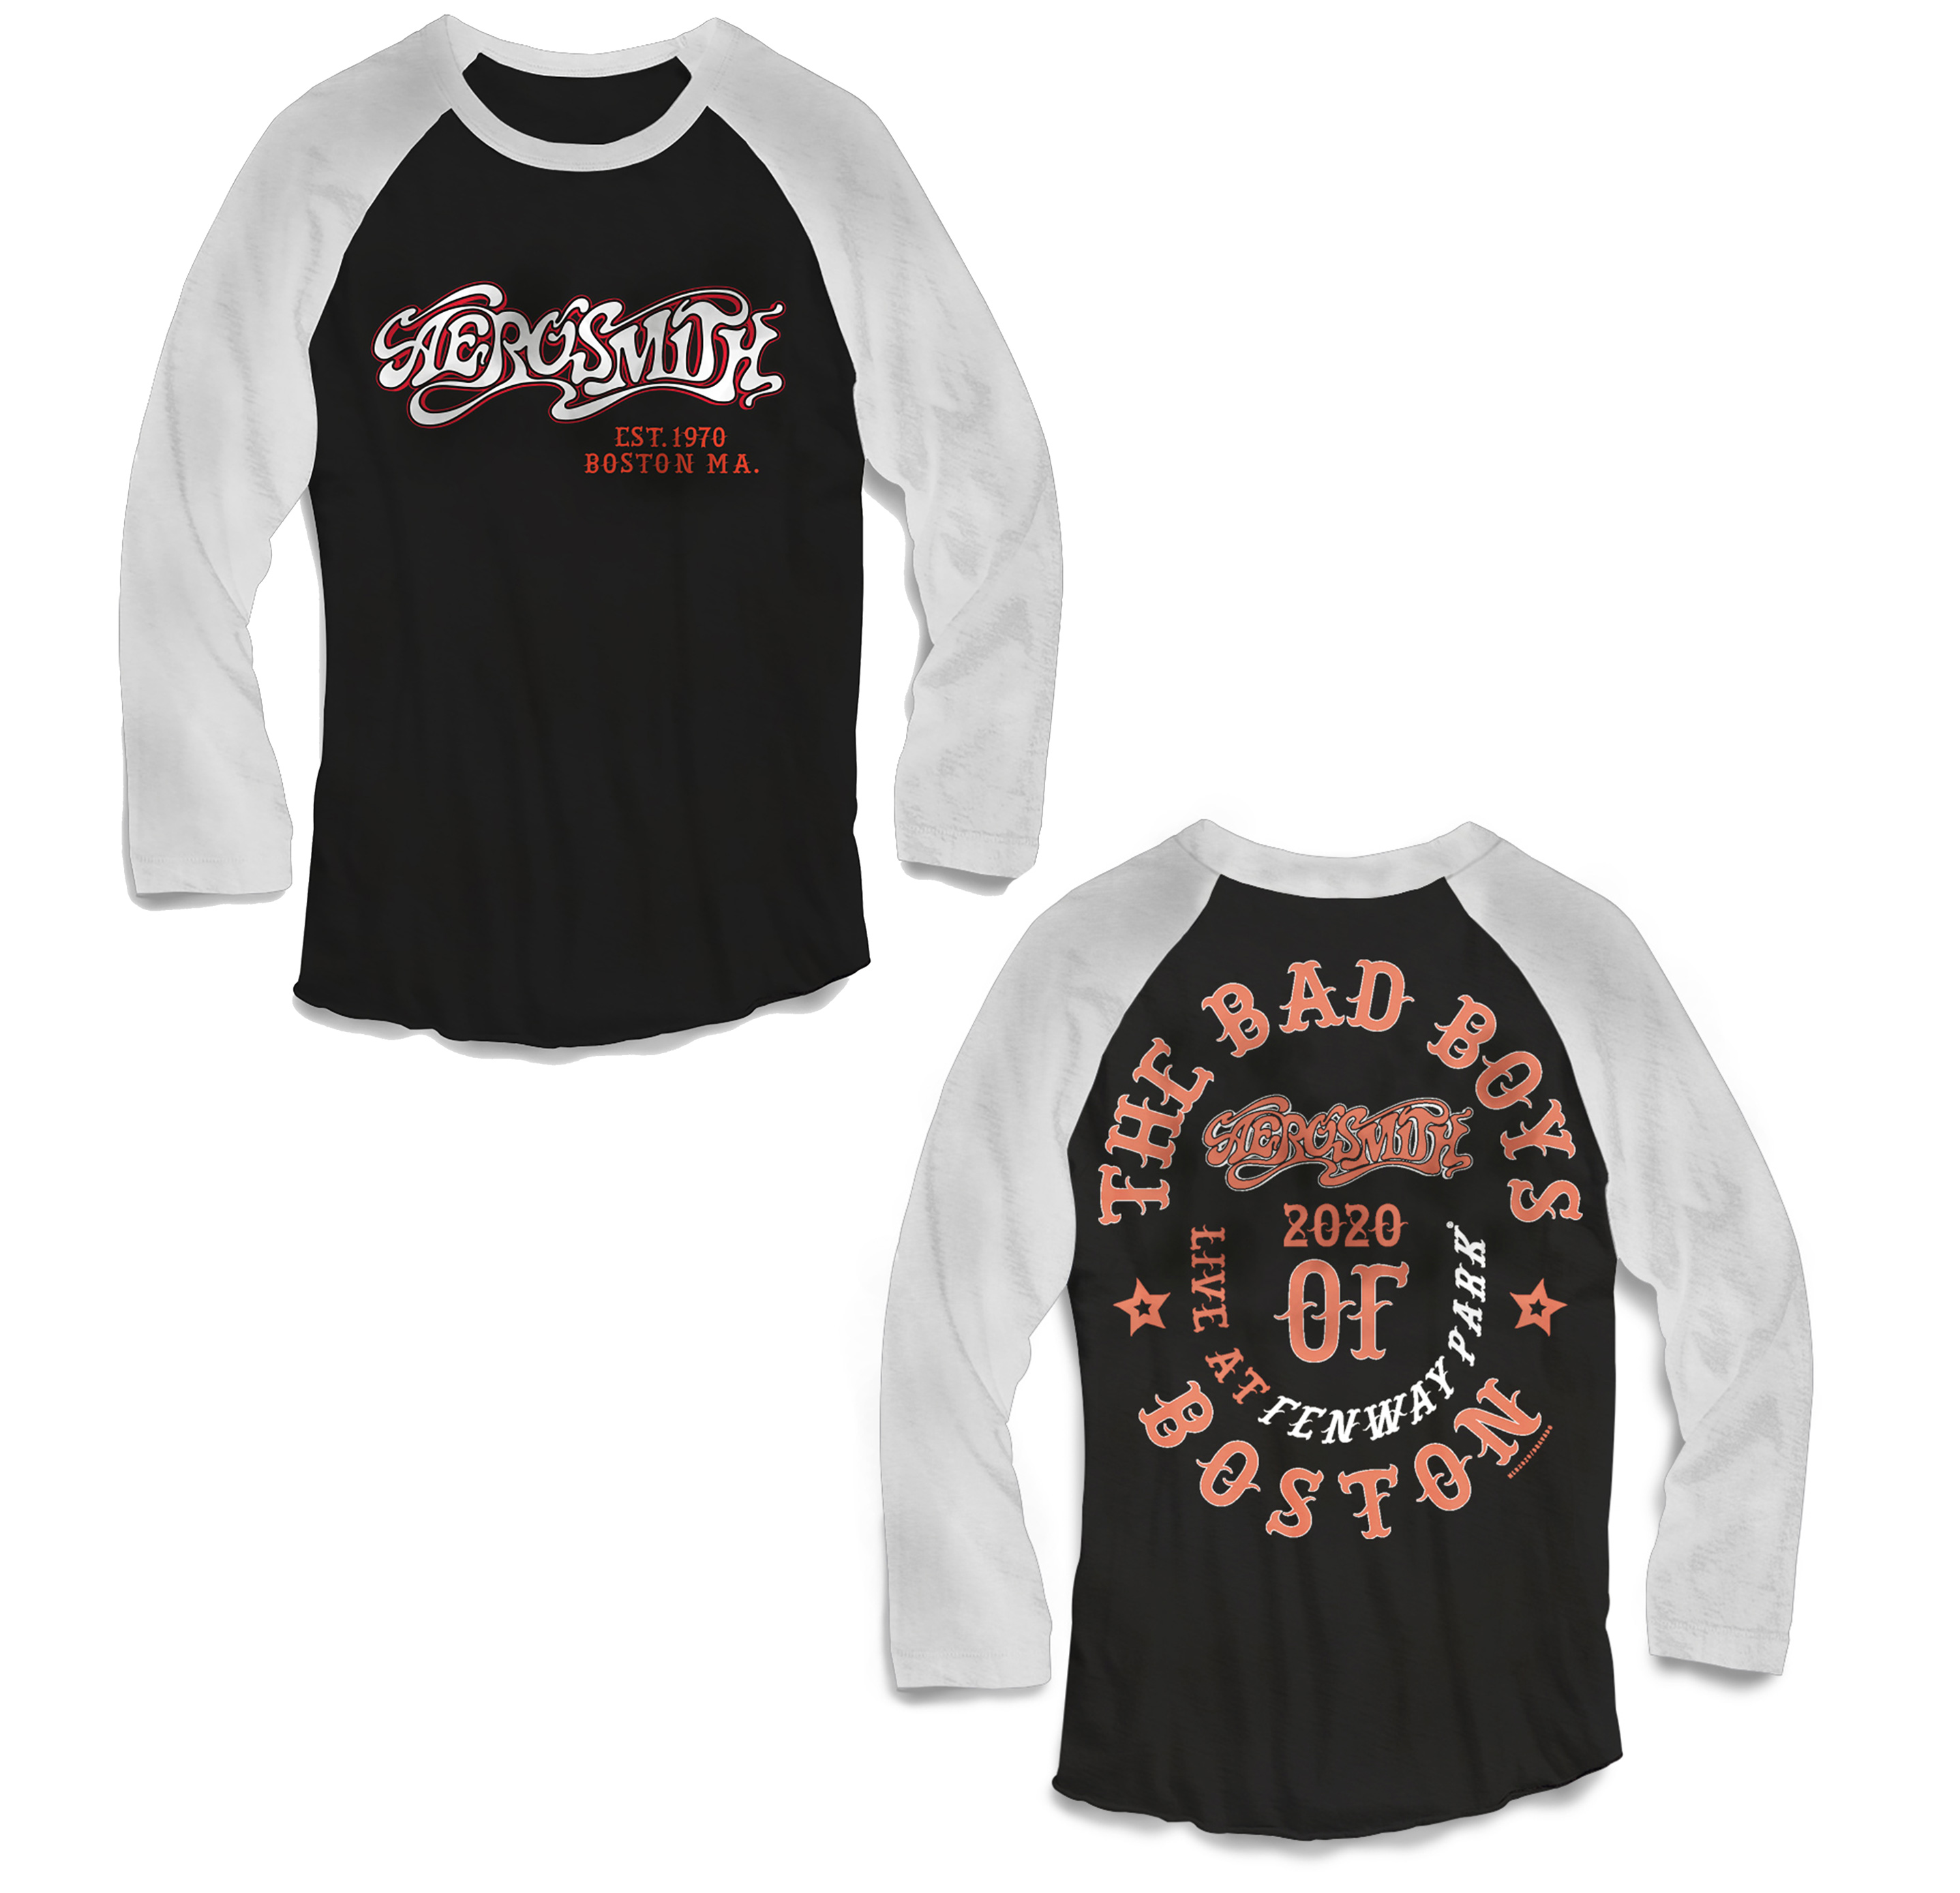 Aerosmith on X: Limited Edition Exclusive Aerosmith Live at Fenway T-Shirt!  Available ONLY with the purchase of your concert ticket. Wear your shirt to  Fenway Park on September 18th and snow your #